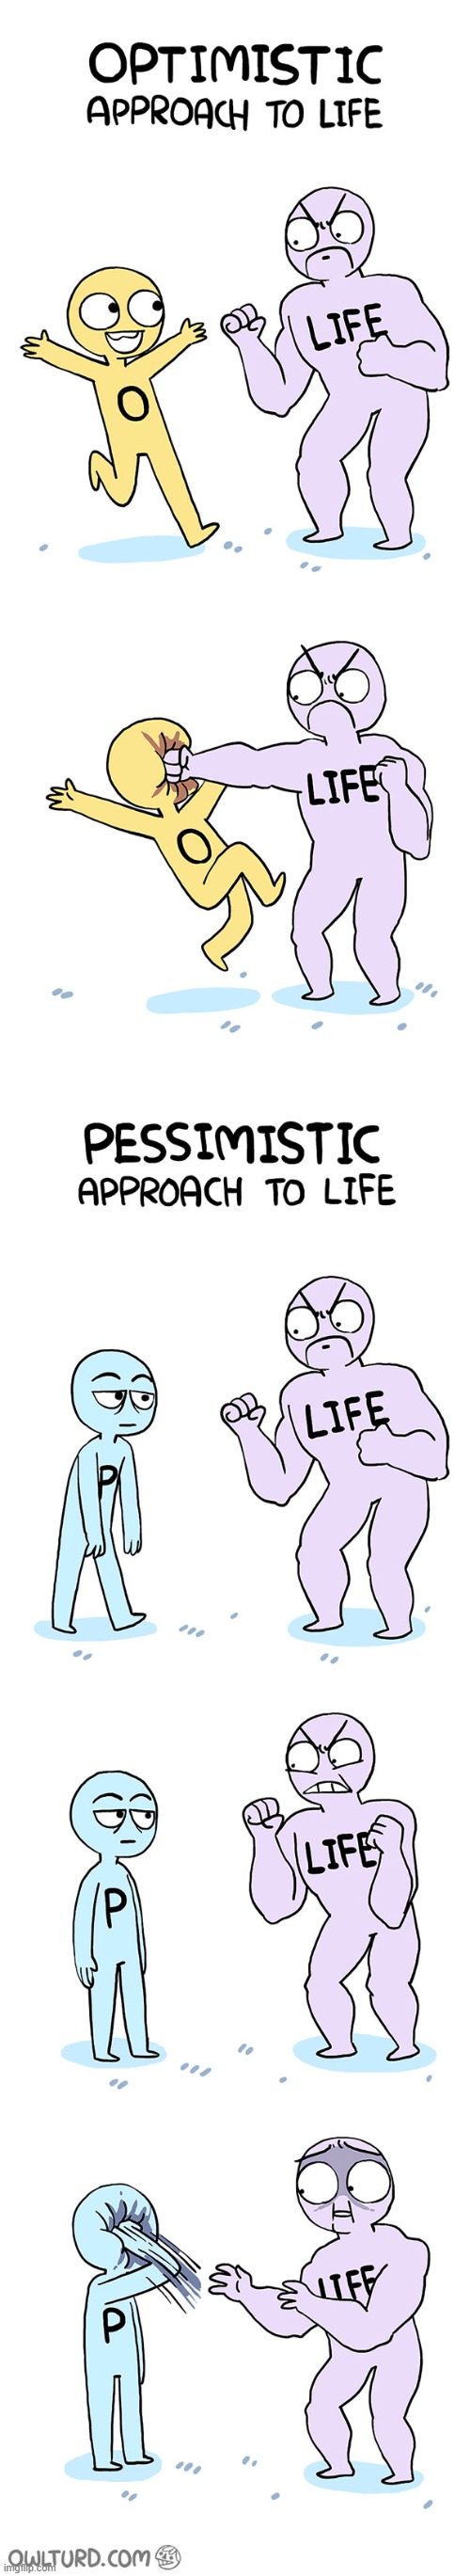 image tagged in approach,life,optimism,pessimism | made w/ Imgflip meme maker